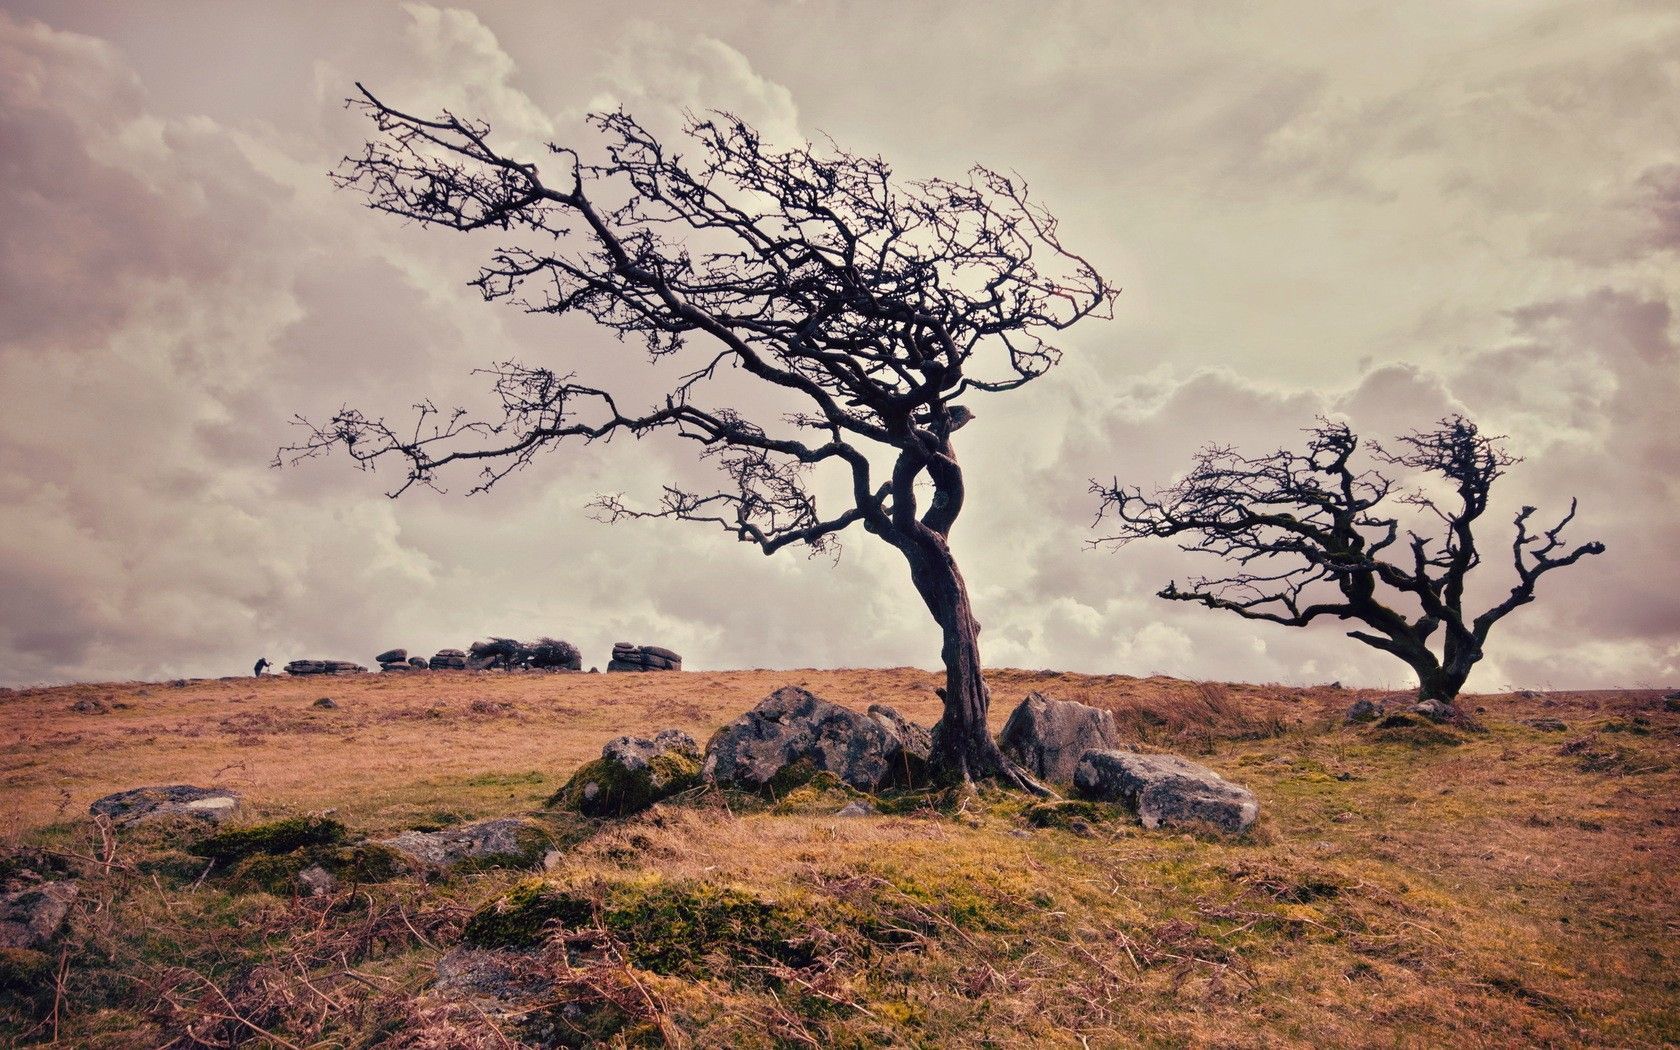 Landscapes (not my photo). Old trees, Landscape wallpaper, Tree photography